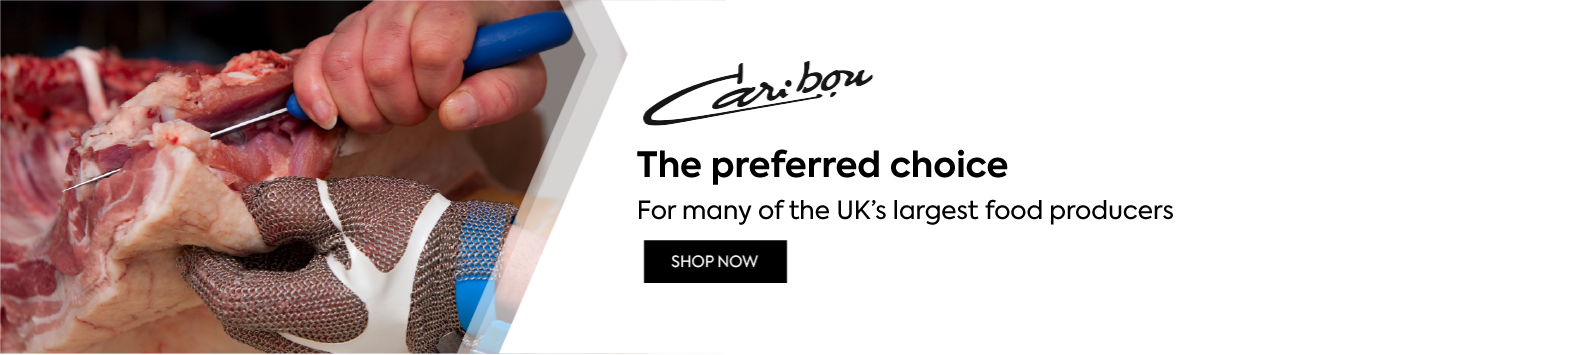 caribou homepage banner